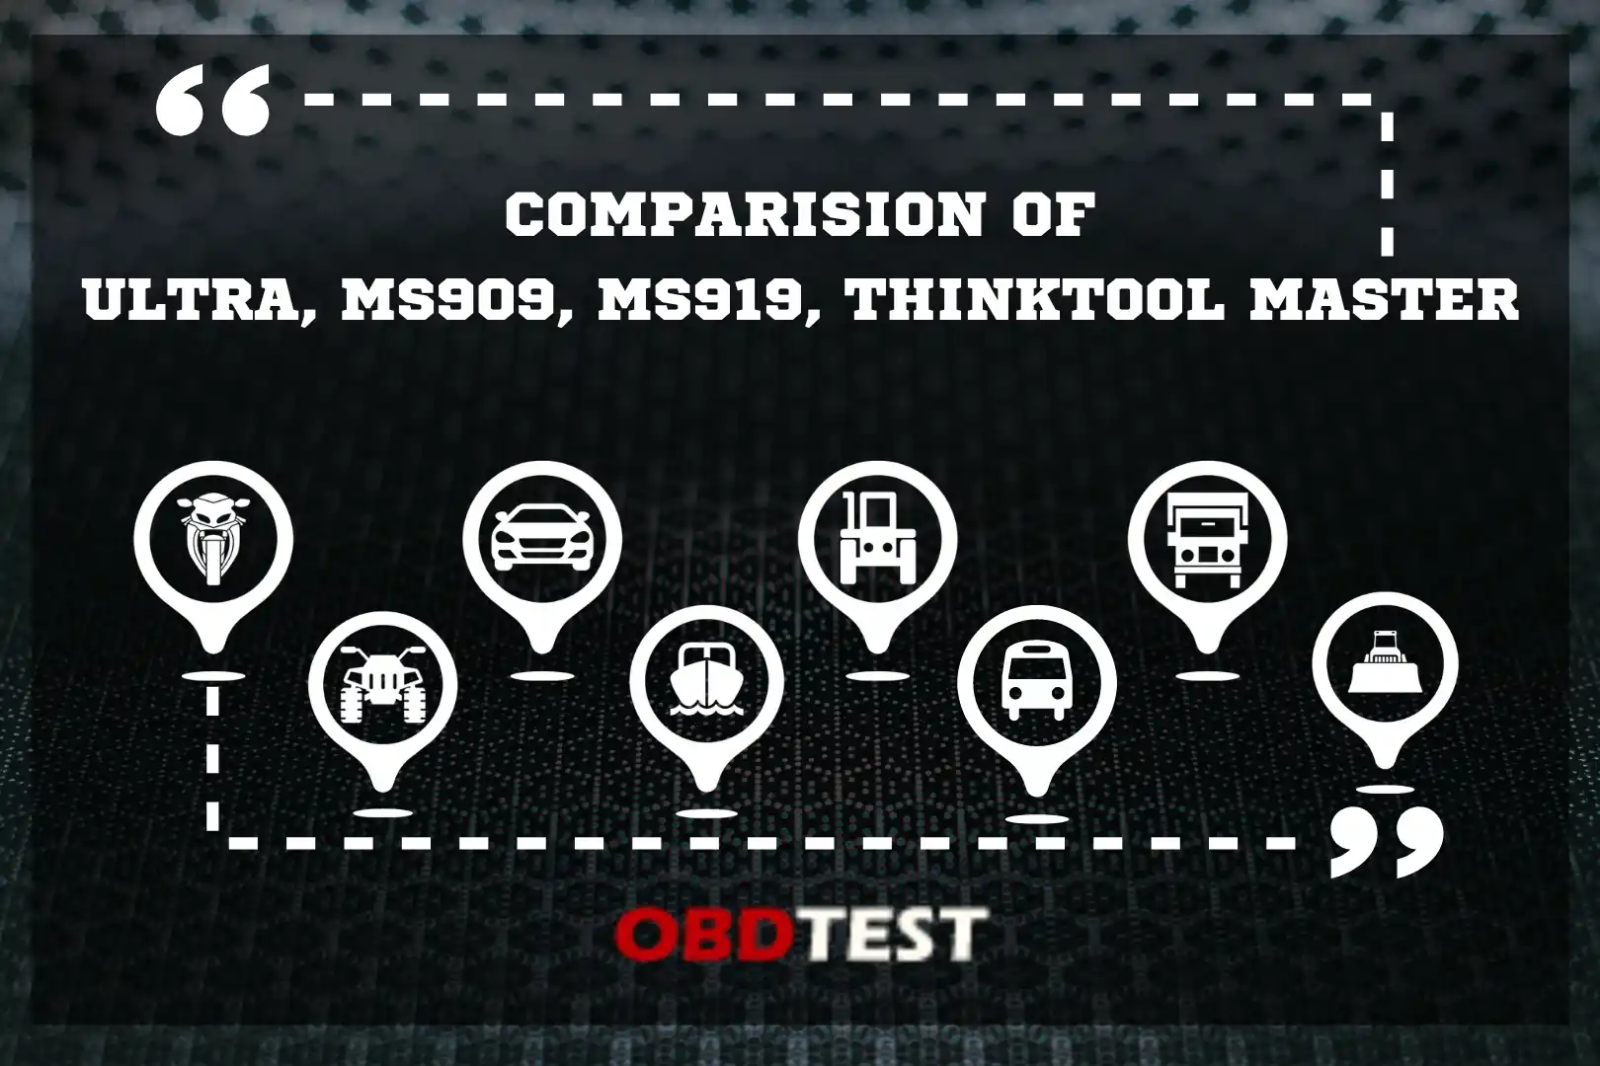 Comparision of Ultra, MS909, MS919, Thinktool Master